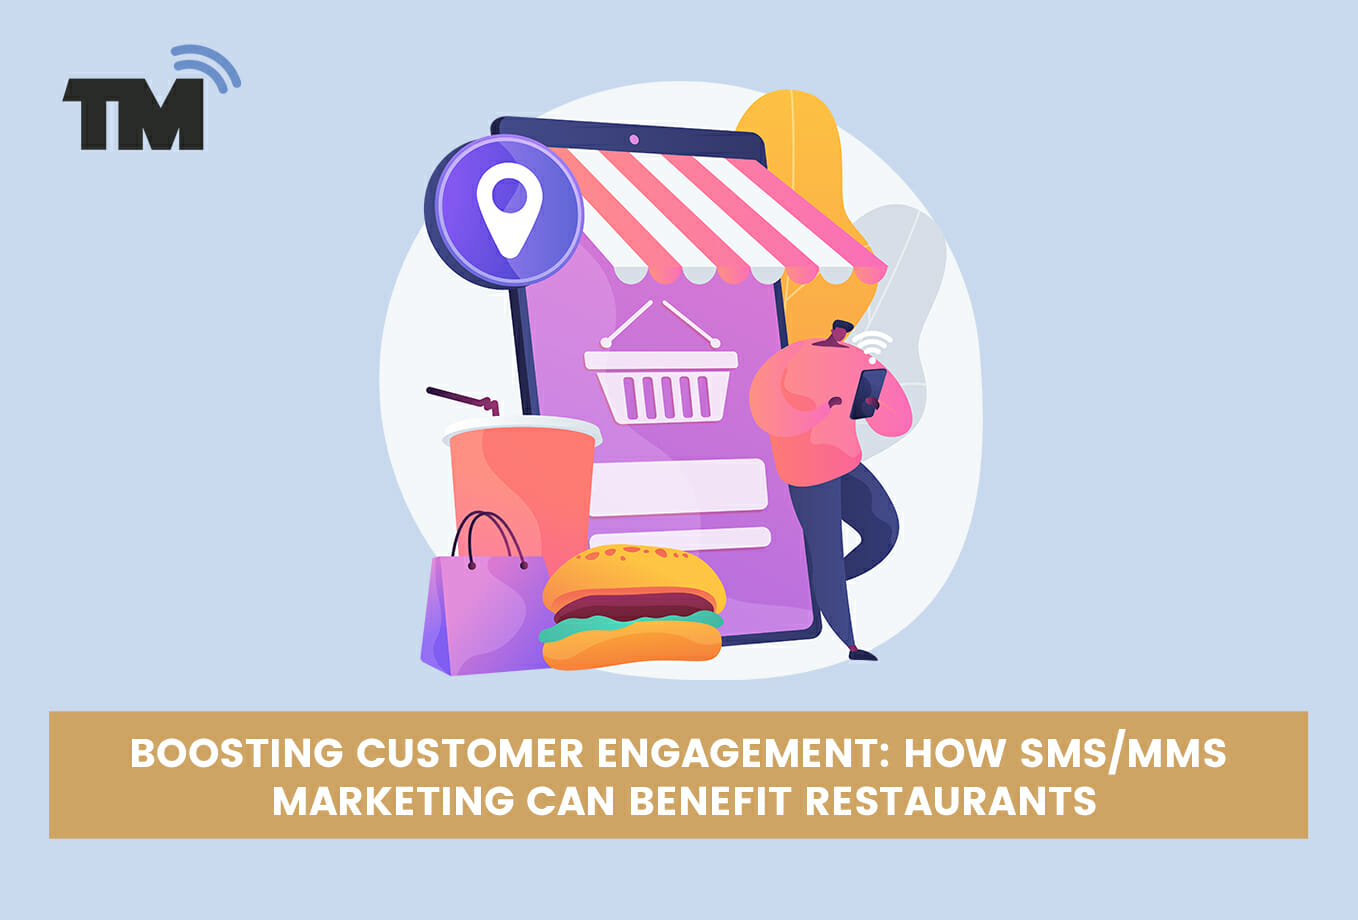 How SMS Marketing Can Boost Customer Engagement for Your Restaurant Business